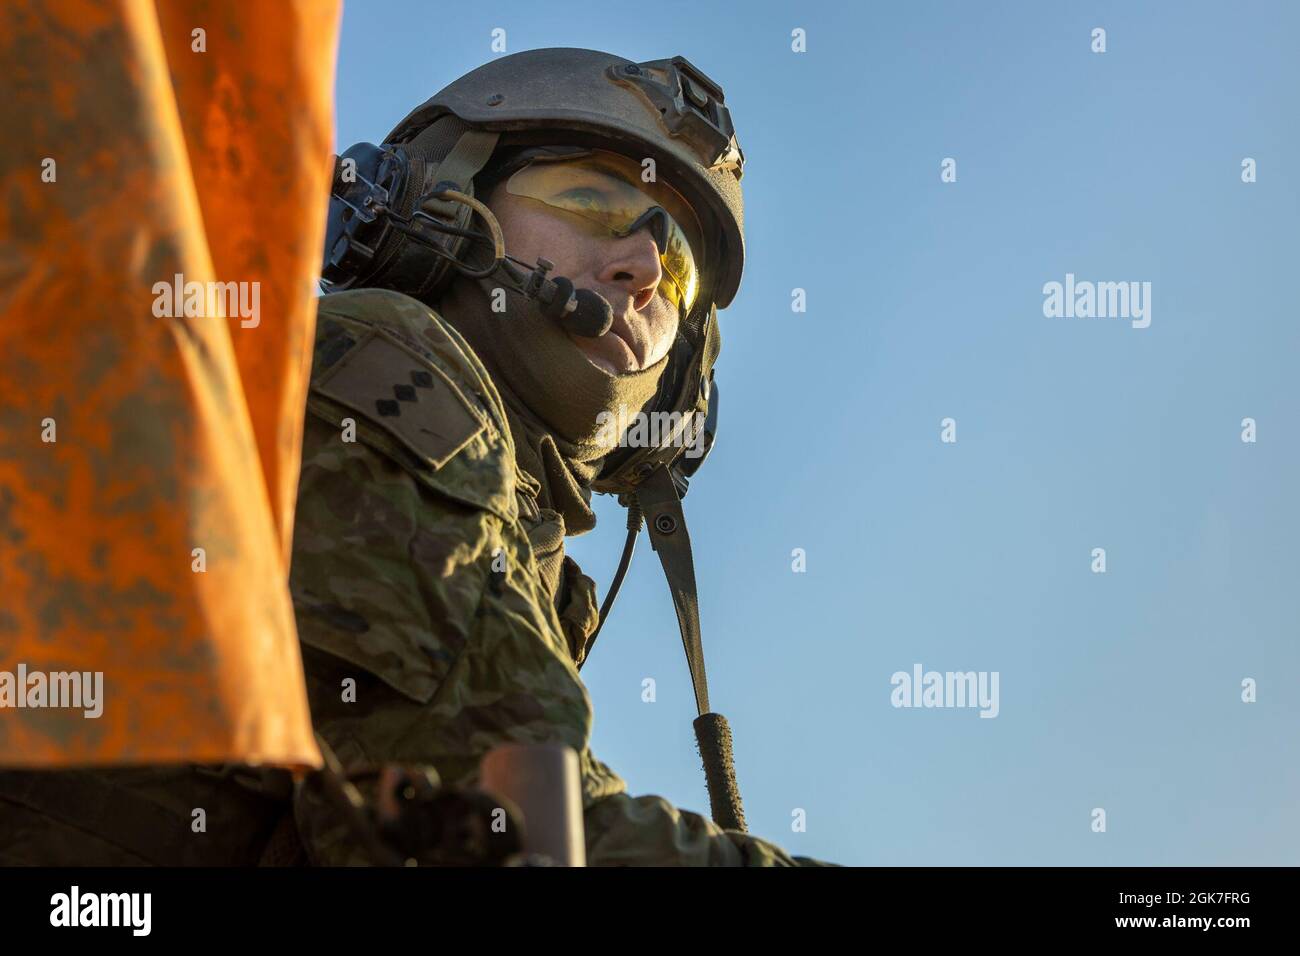 Australian Army Soldier Capt. Benjamin Peterson, tank officer instructor at the school of armour, observes the convoy of armoured vehicles before starting the movements for rehearsal of live fore ranges during Exercise Koolendong at Bradshaw Field Training Area, NT, Australia, Aug 25, 2021. Peterson was the safety officer for the mounted and dismounted attacks by the armoured vehicles during the exercise. Exercises like Koolendong validate MRF-D’s and the ADF’s ability to conduct expeditionary advanced base operations with combined innovative capabilities; and through their shared commitment, Stock Photo